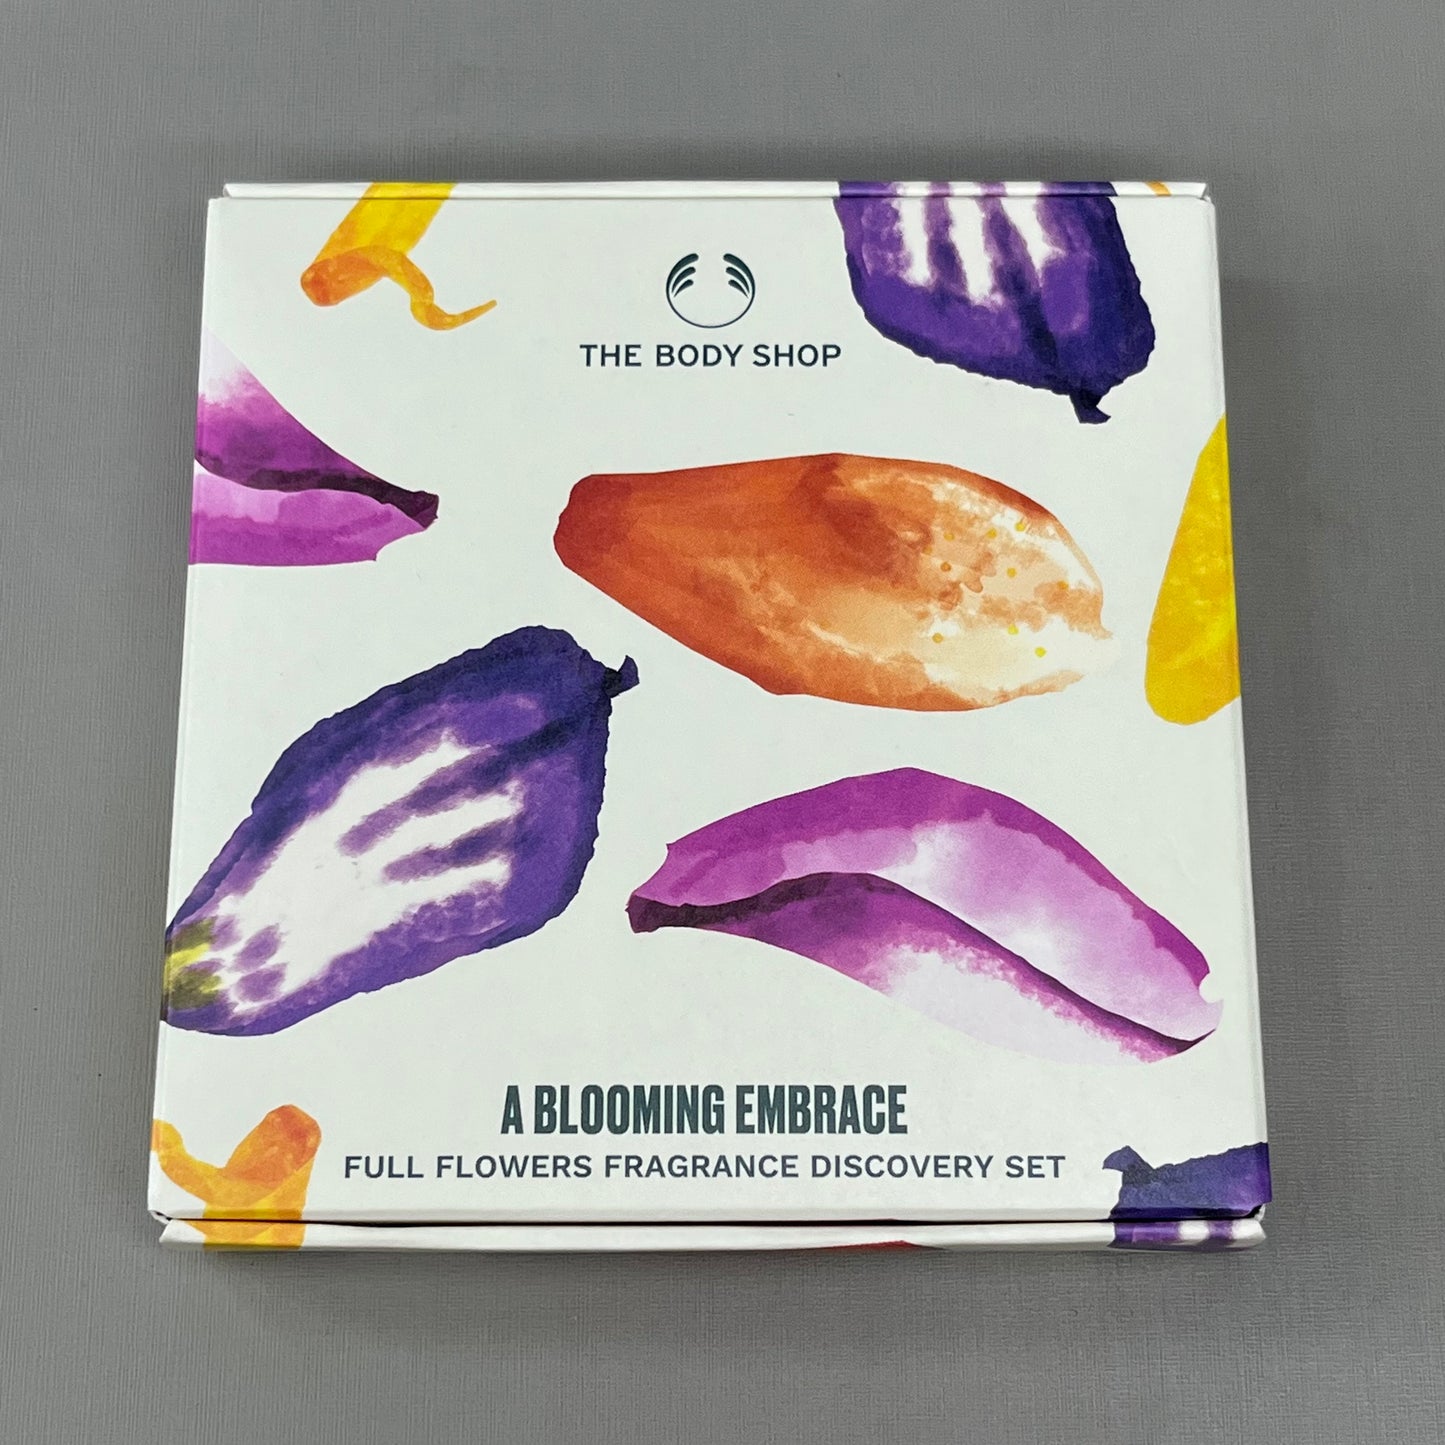 THE BODY SHOP 2 PACK!! Blooming Embrace Full Flowers Fragrance Discovery Set (New)